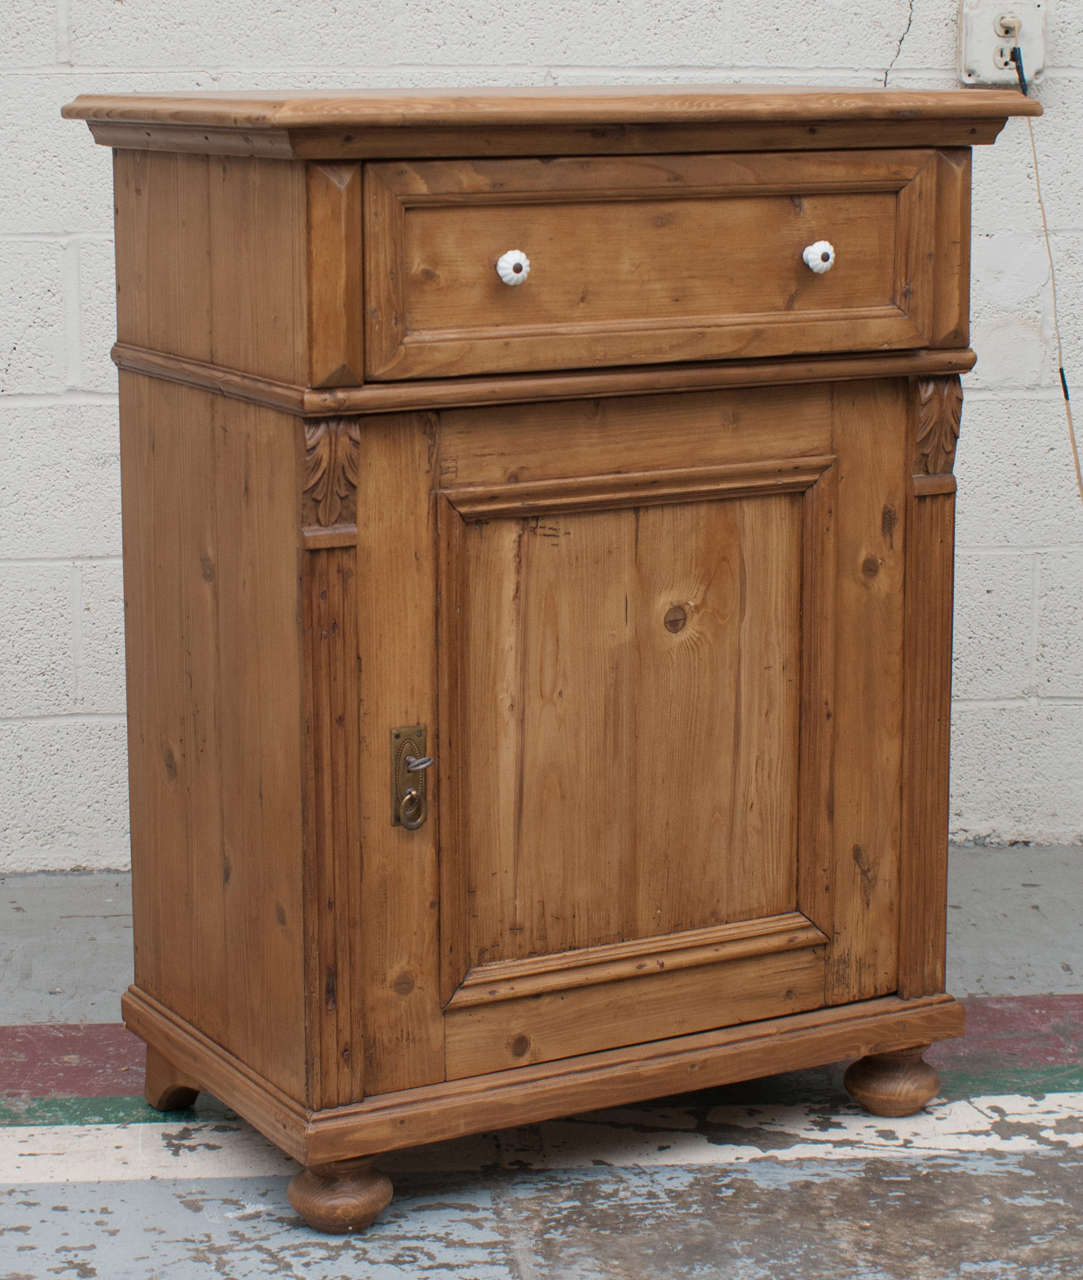 A small pine storage cupboard featuring a single hand-cut dovetailed drawer with original ceramic knobs above a single panelled door flanked by fluted moulding and acanthus leaf corbels.  The feet can be removed to adjust the height for use as a